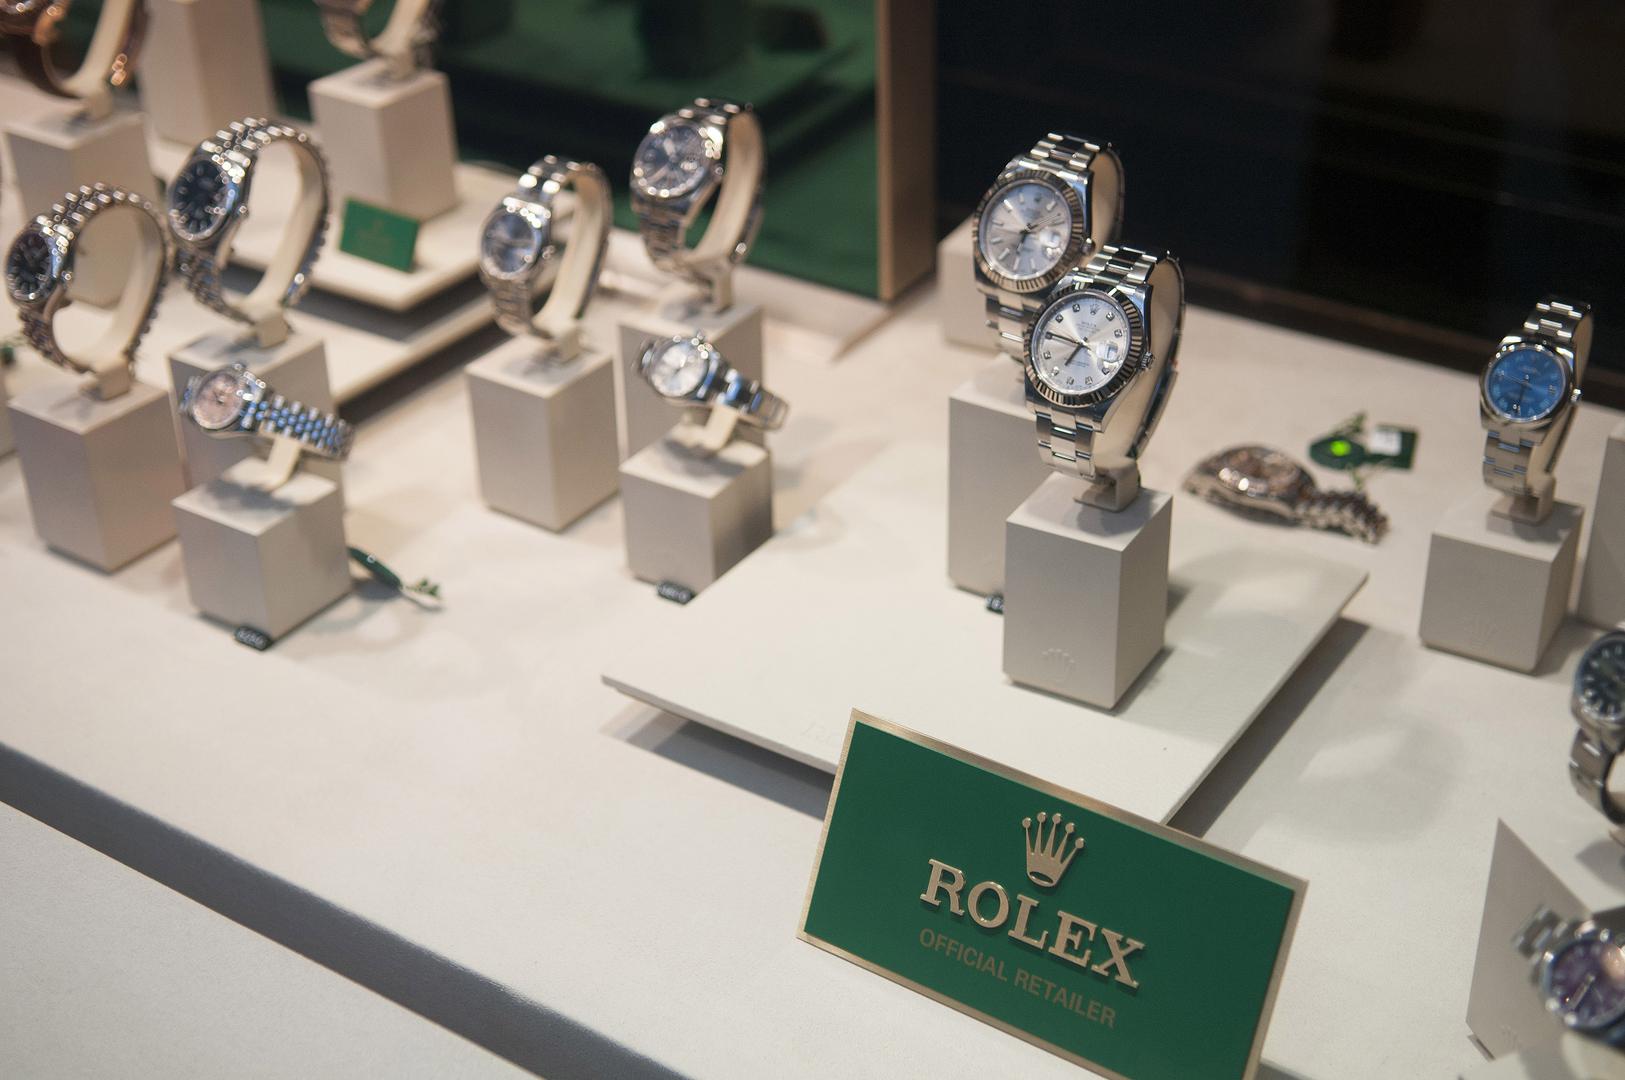 Rolex watches displayed in the window of a store in London, UK, November 2016. 